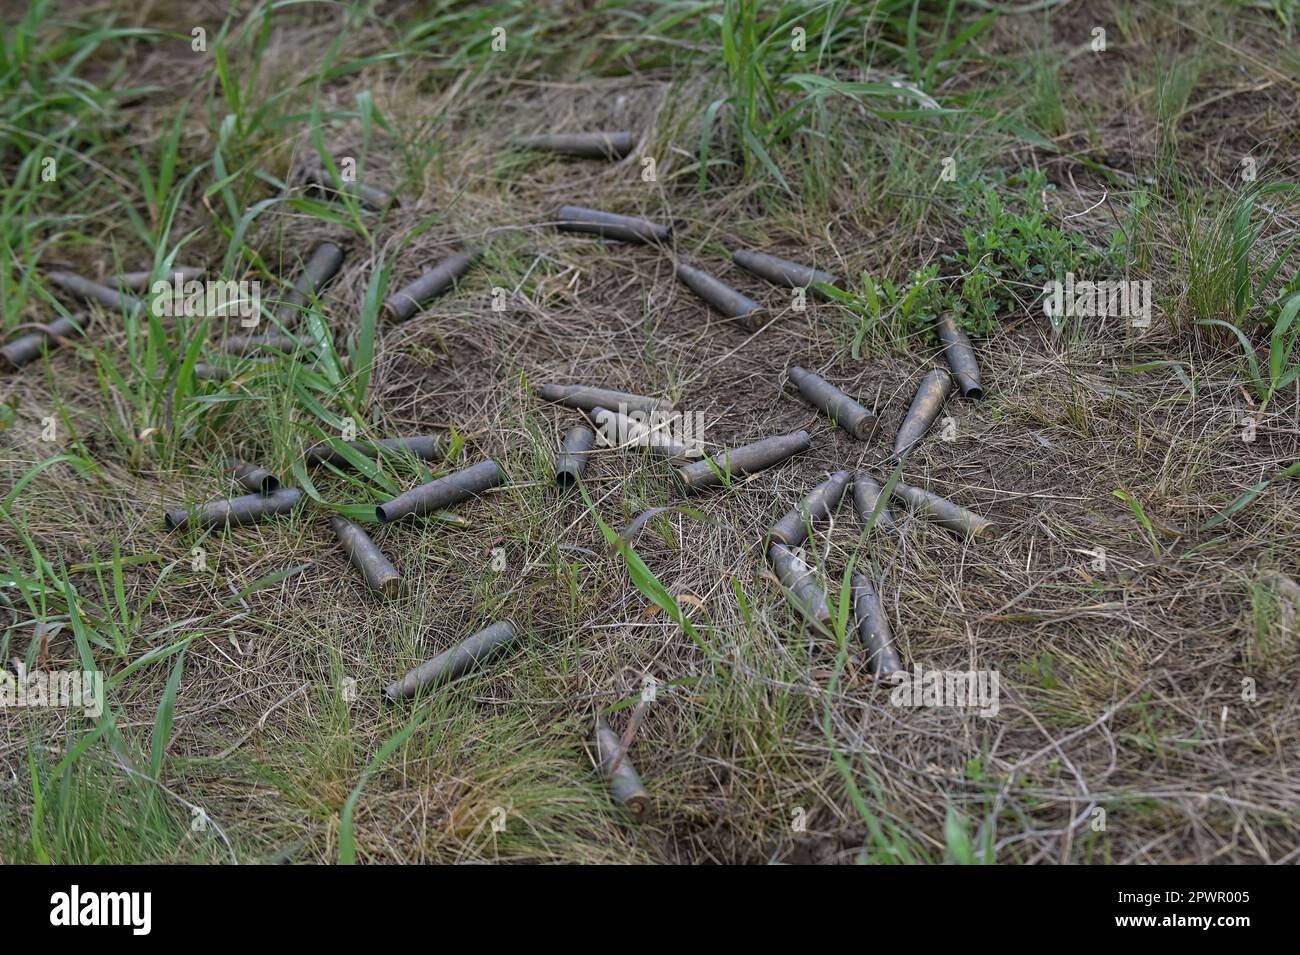 ZAPORIZHZHIA REGION, UKRAINE - APRIL 28, 2023 - Bullet casings lie in the grass during the military exercise to polish offensive actions by a Territor Stock Photo